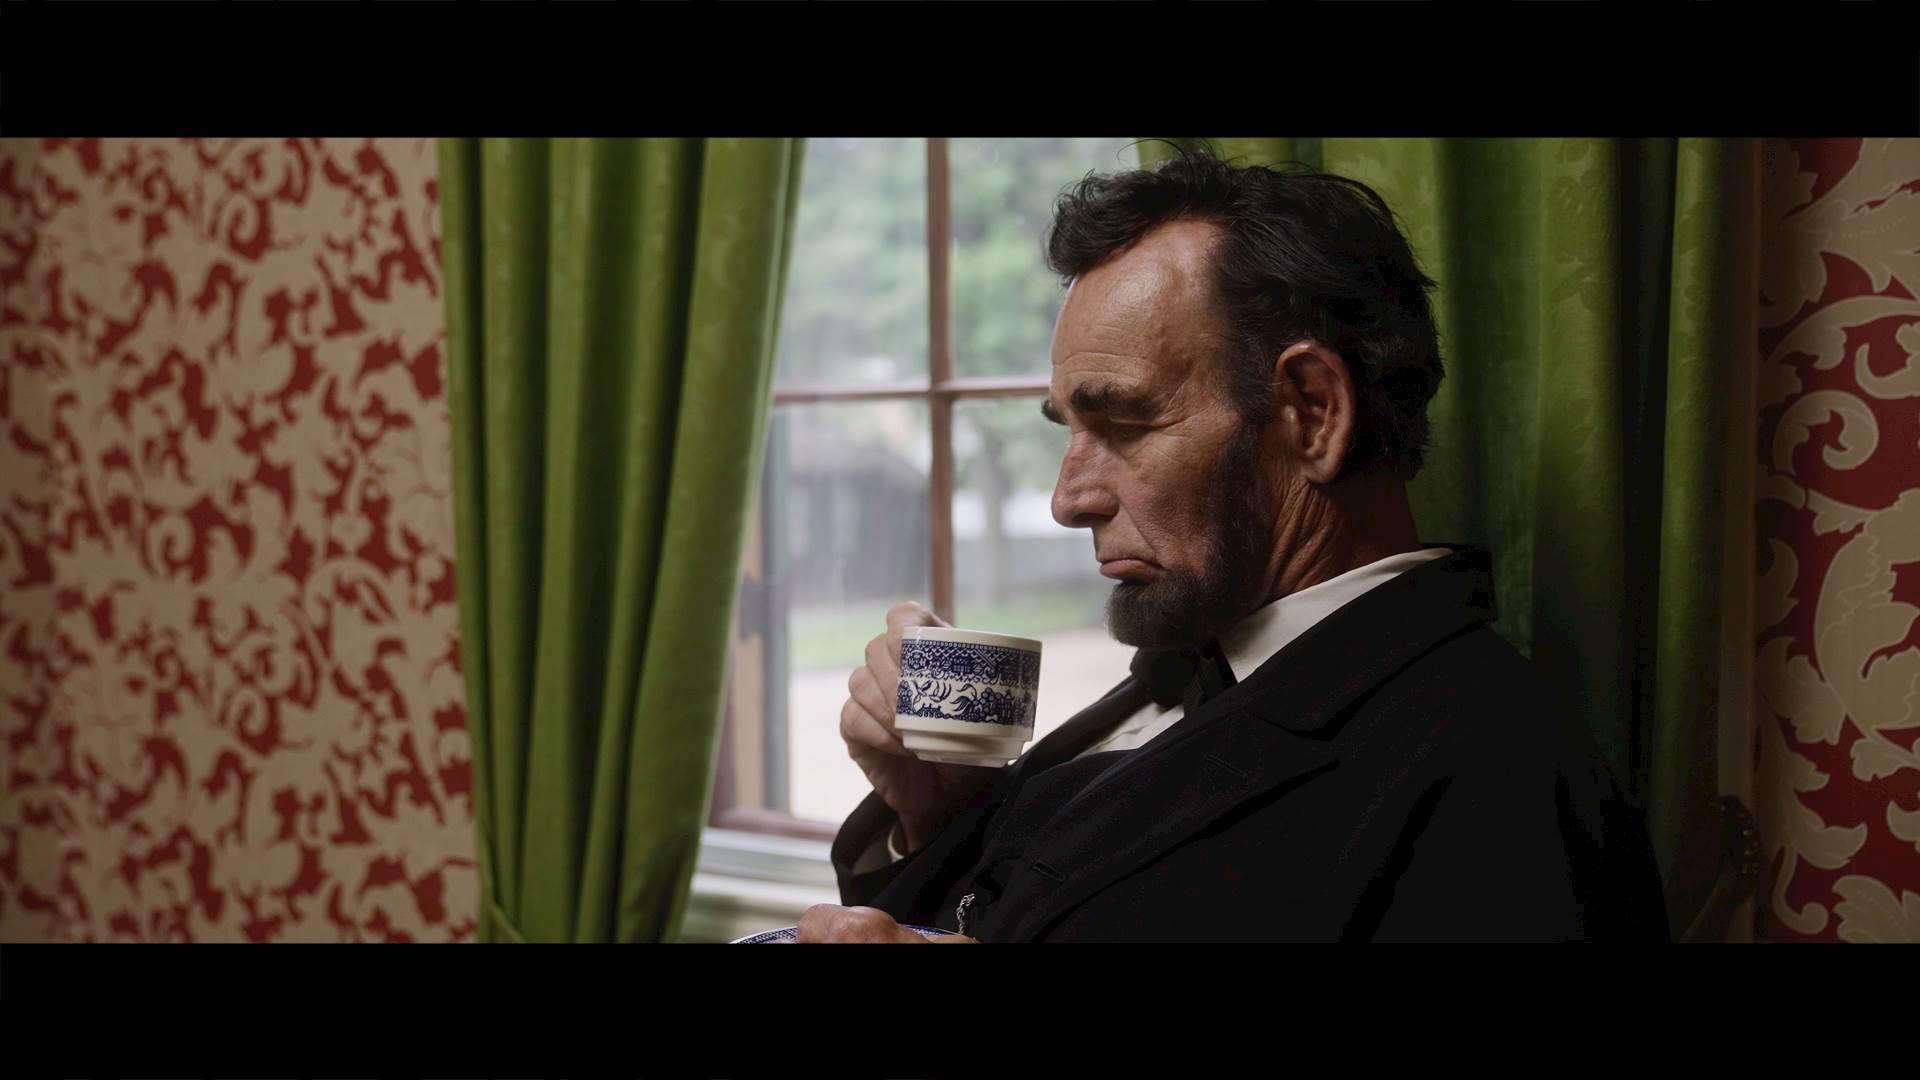 Lincoln drinks a from a cup while sitting by a window with green curtians.